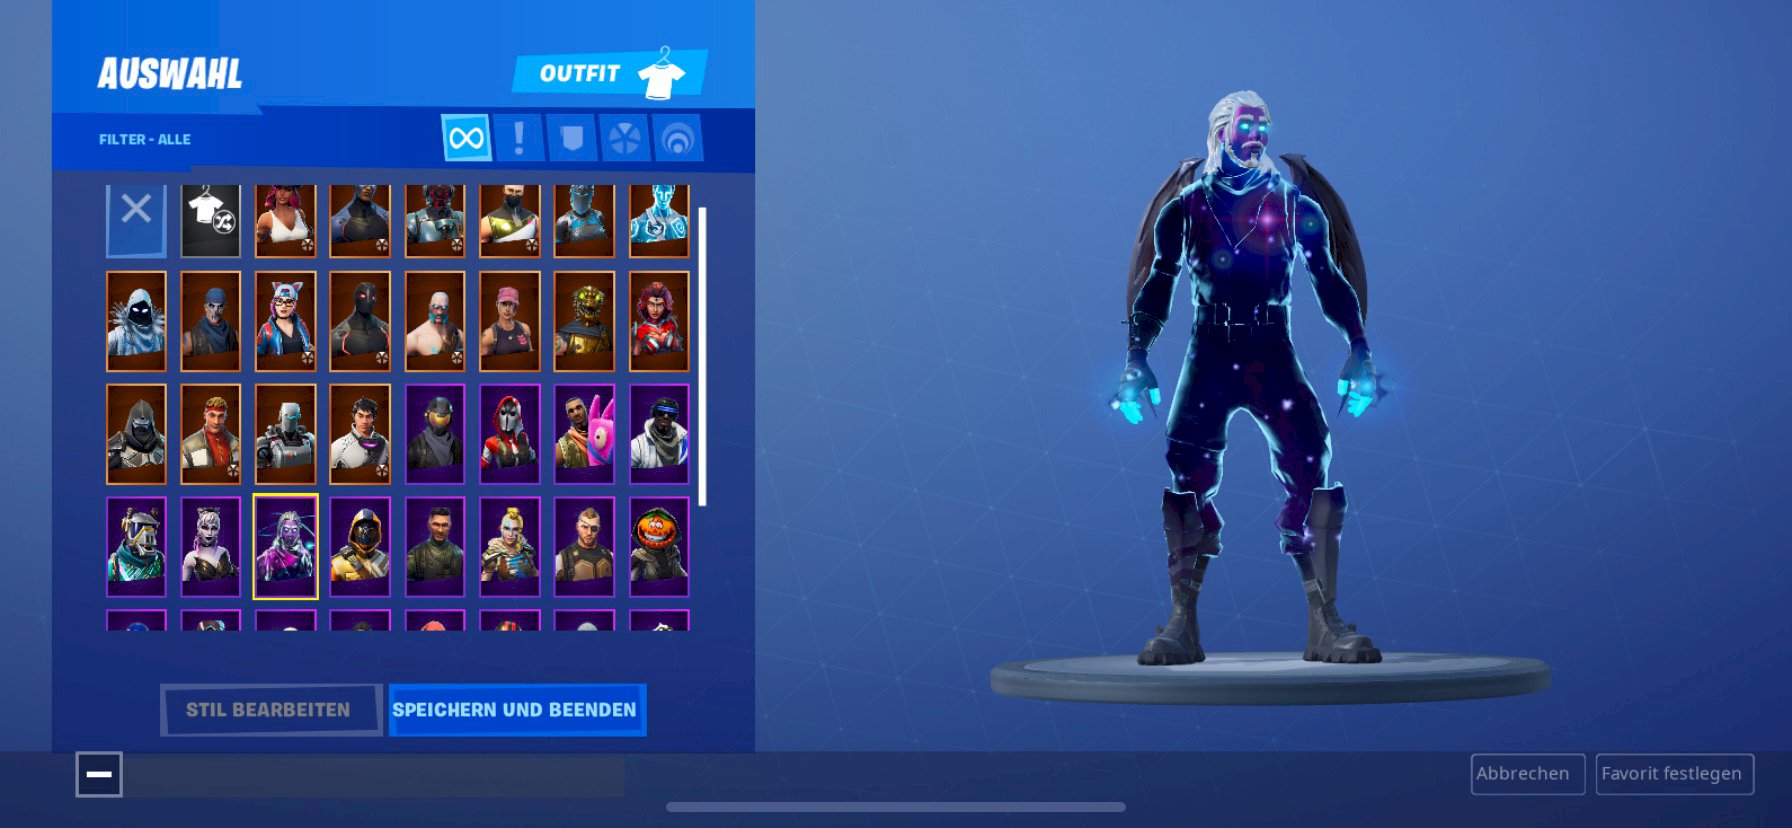 How much is my account worth with Galaxy Skin and Save the World